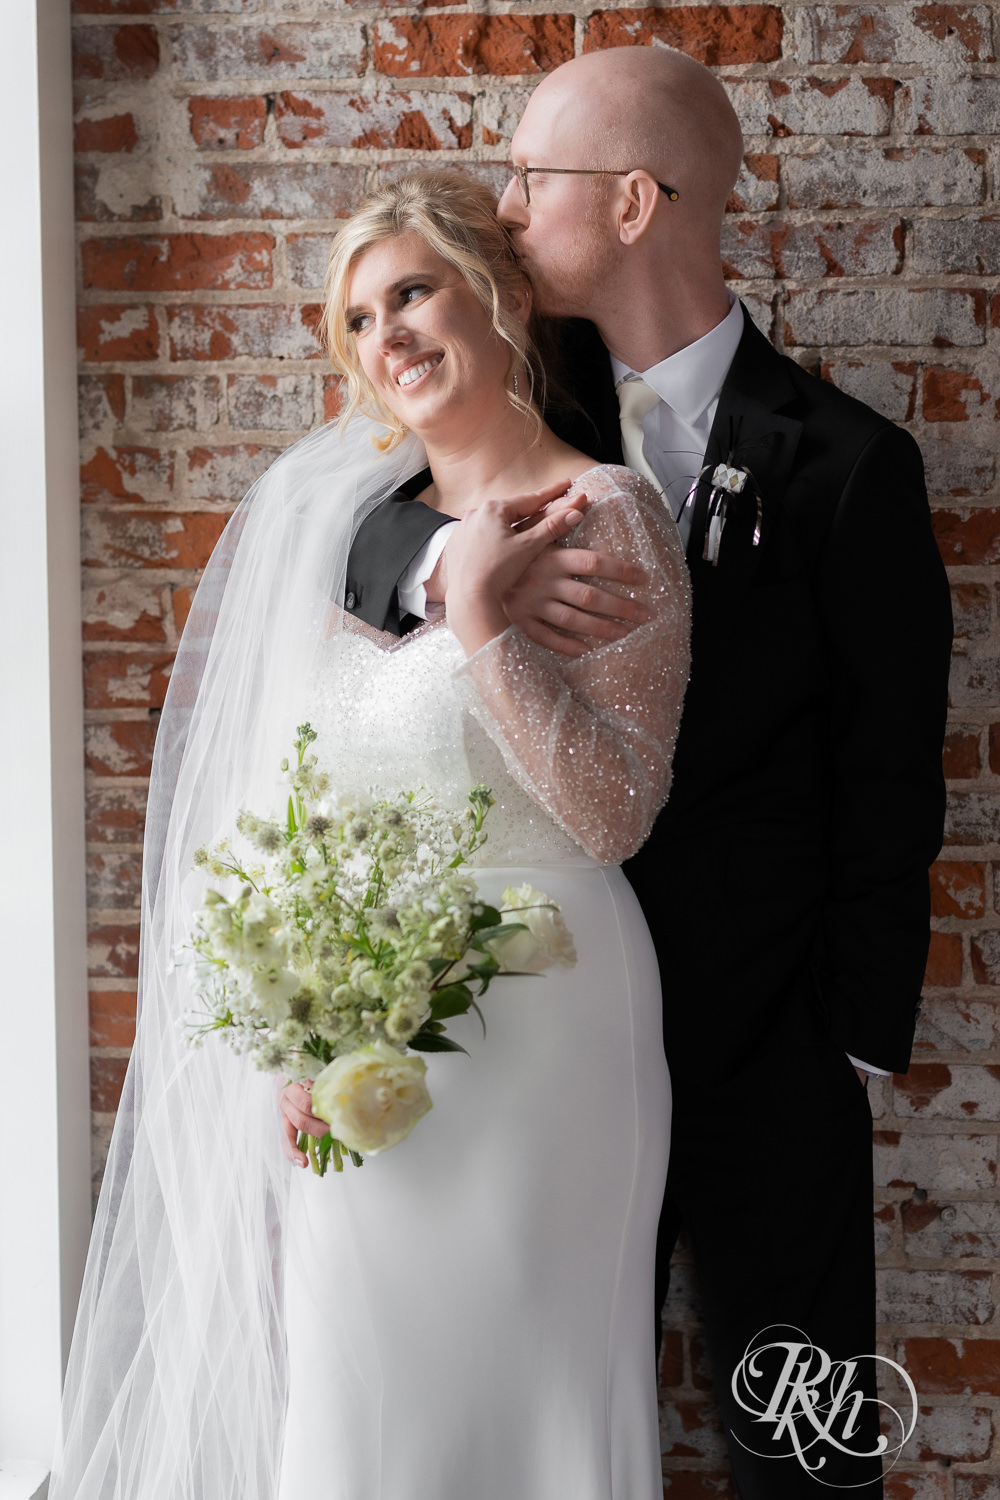 Bride and groom kiss during winter wedding at Gatherings at Station 10 in Saint Paul, Minnesota.